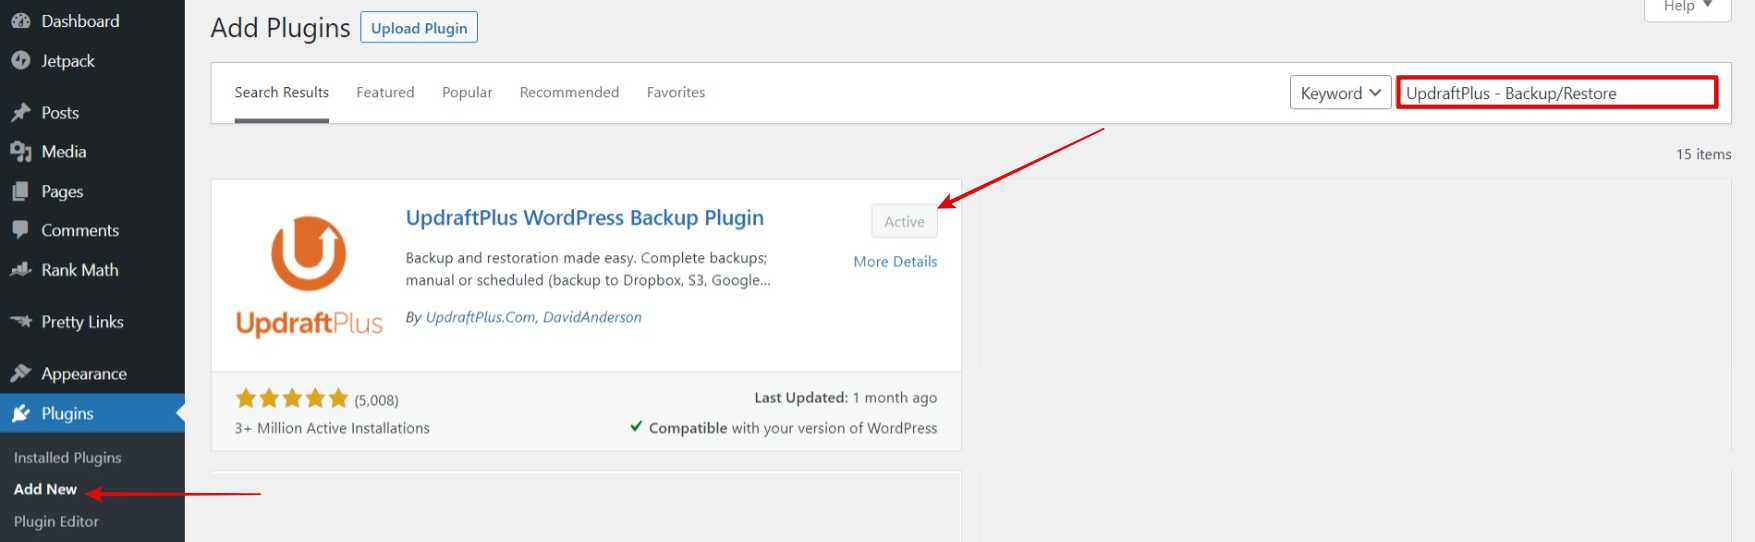 Log in to website Dashboard > Plugins > Add New > Search For "UpdraftPlus - Backup/Restore" Install & Activate the Plugin